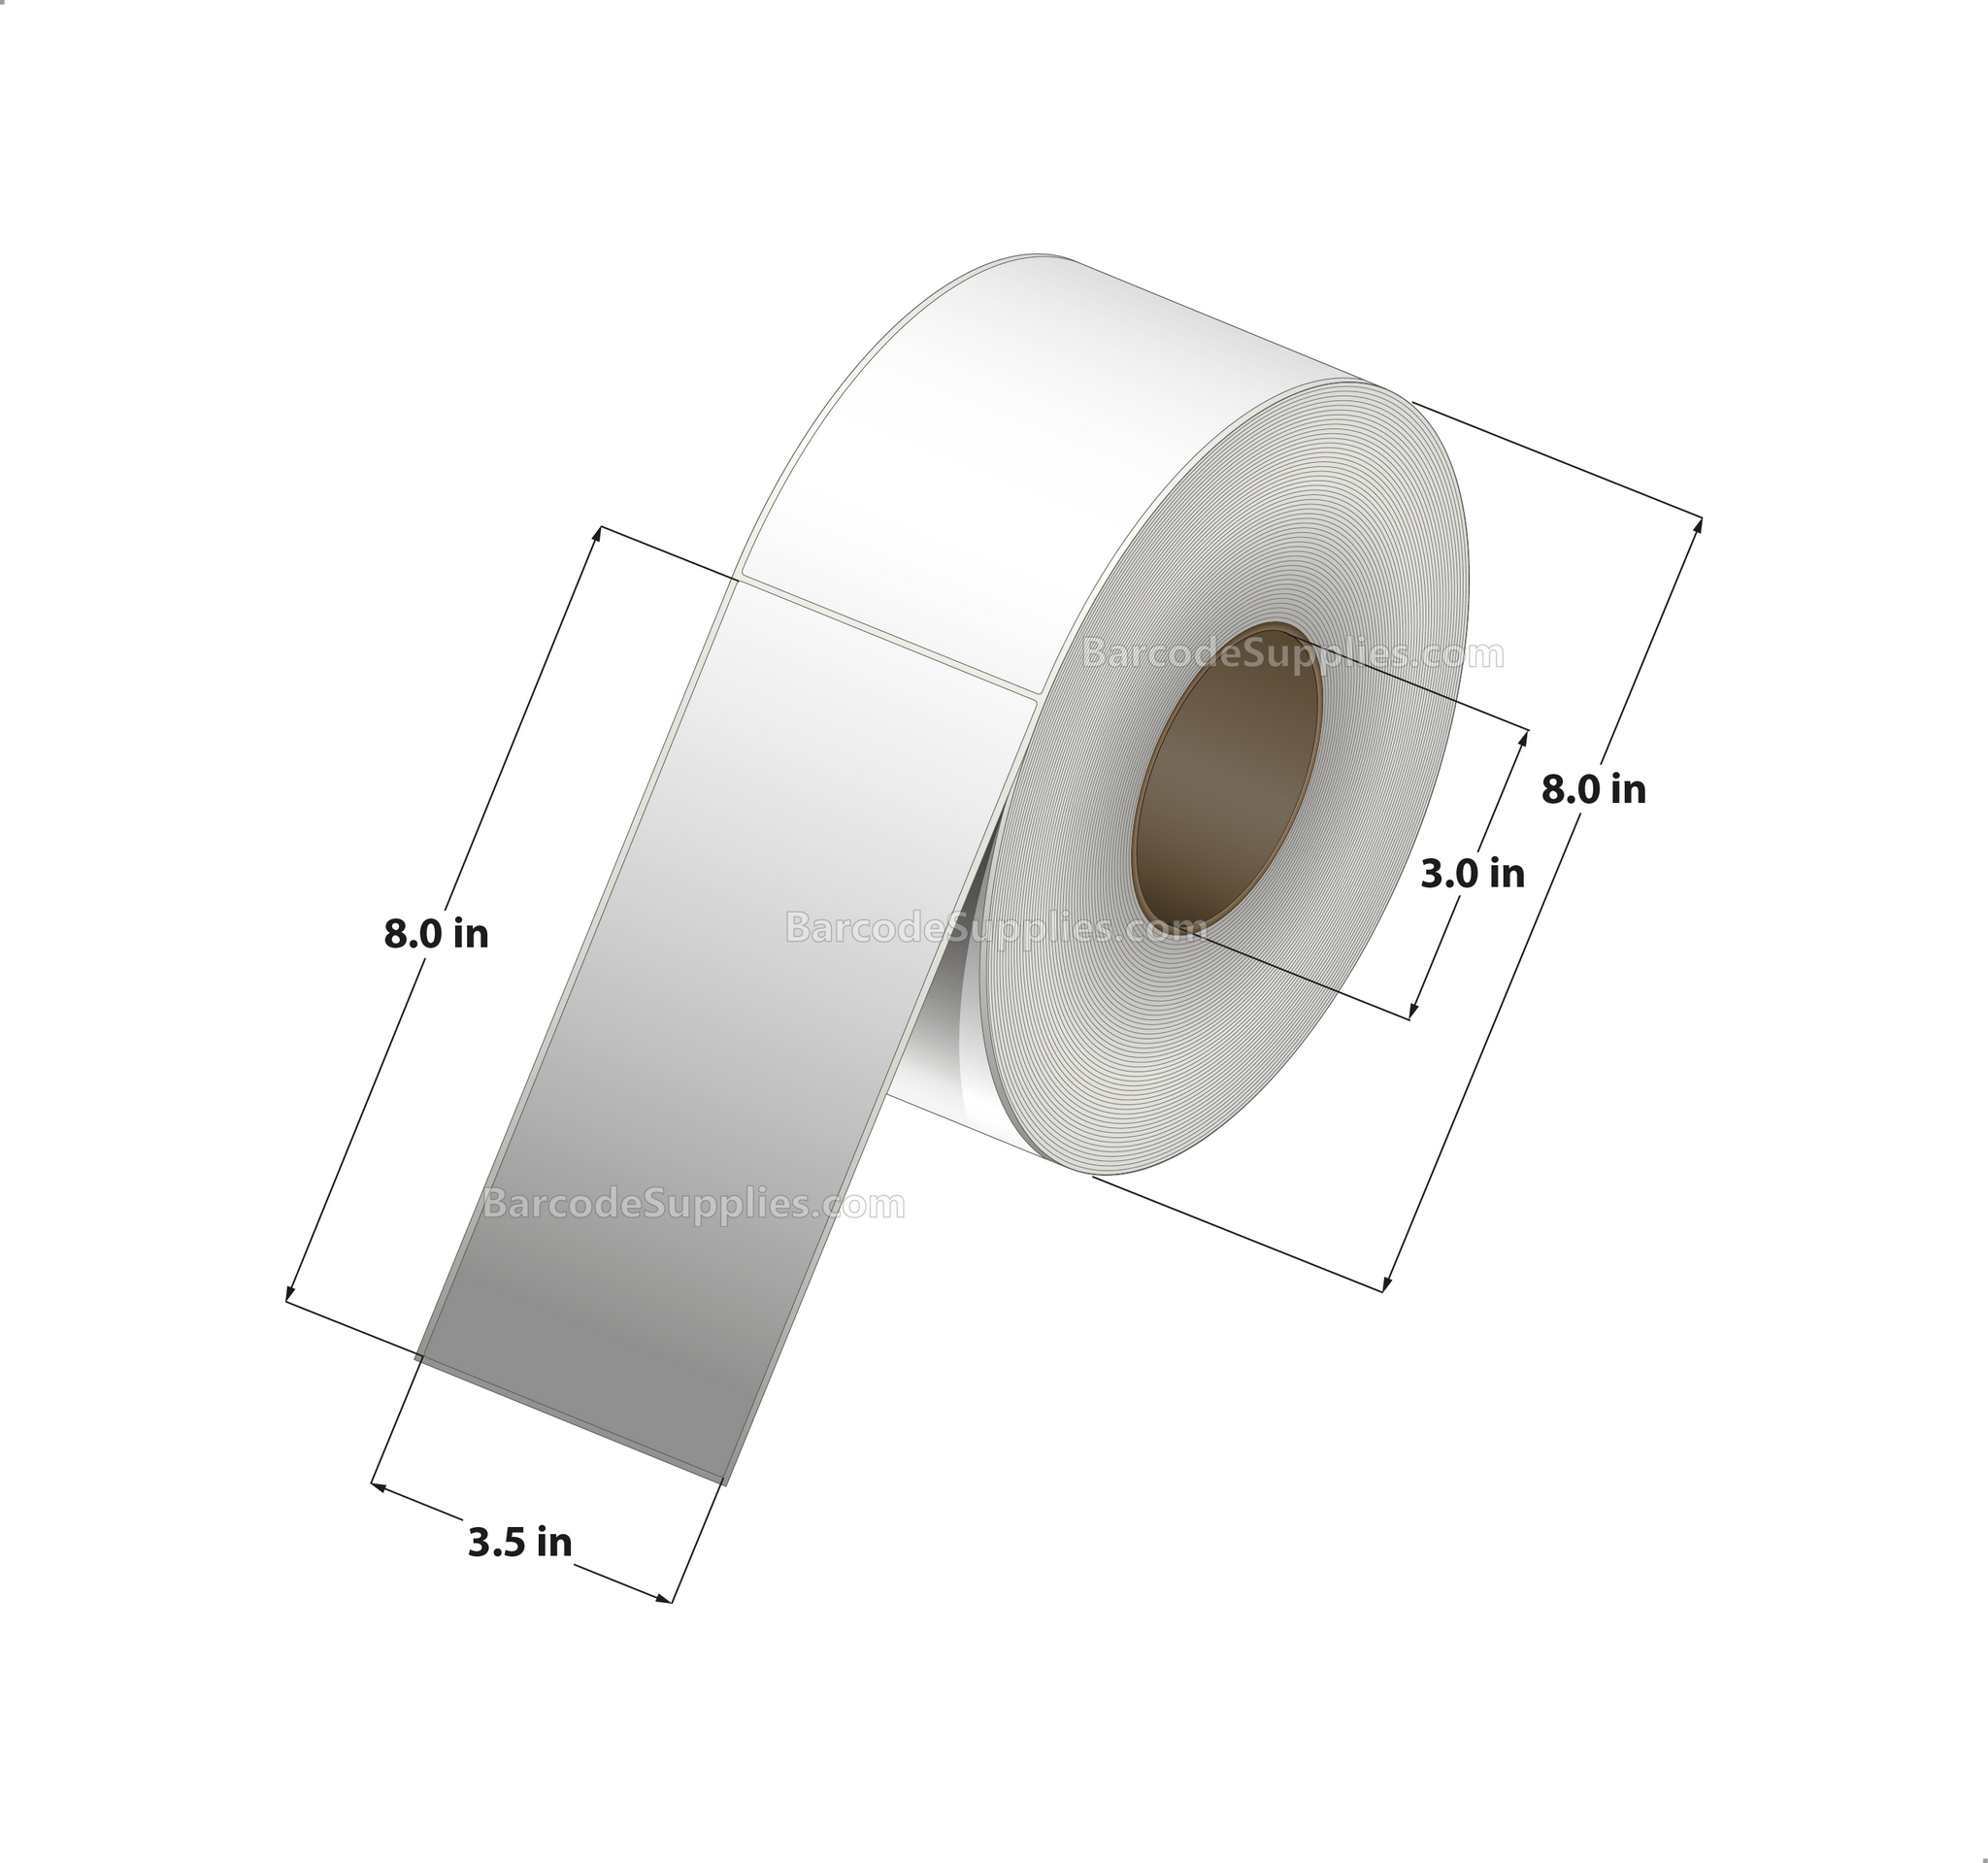 3.5 x 8 Thermal Transfer White Labels With Permanent Acrylic Adhesive - Not Perforated - 750 Labels Per Roll - Carton Of 6 Rolls - 4500 Labels Total - MPN: TH358-1